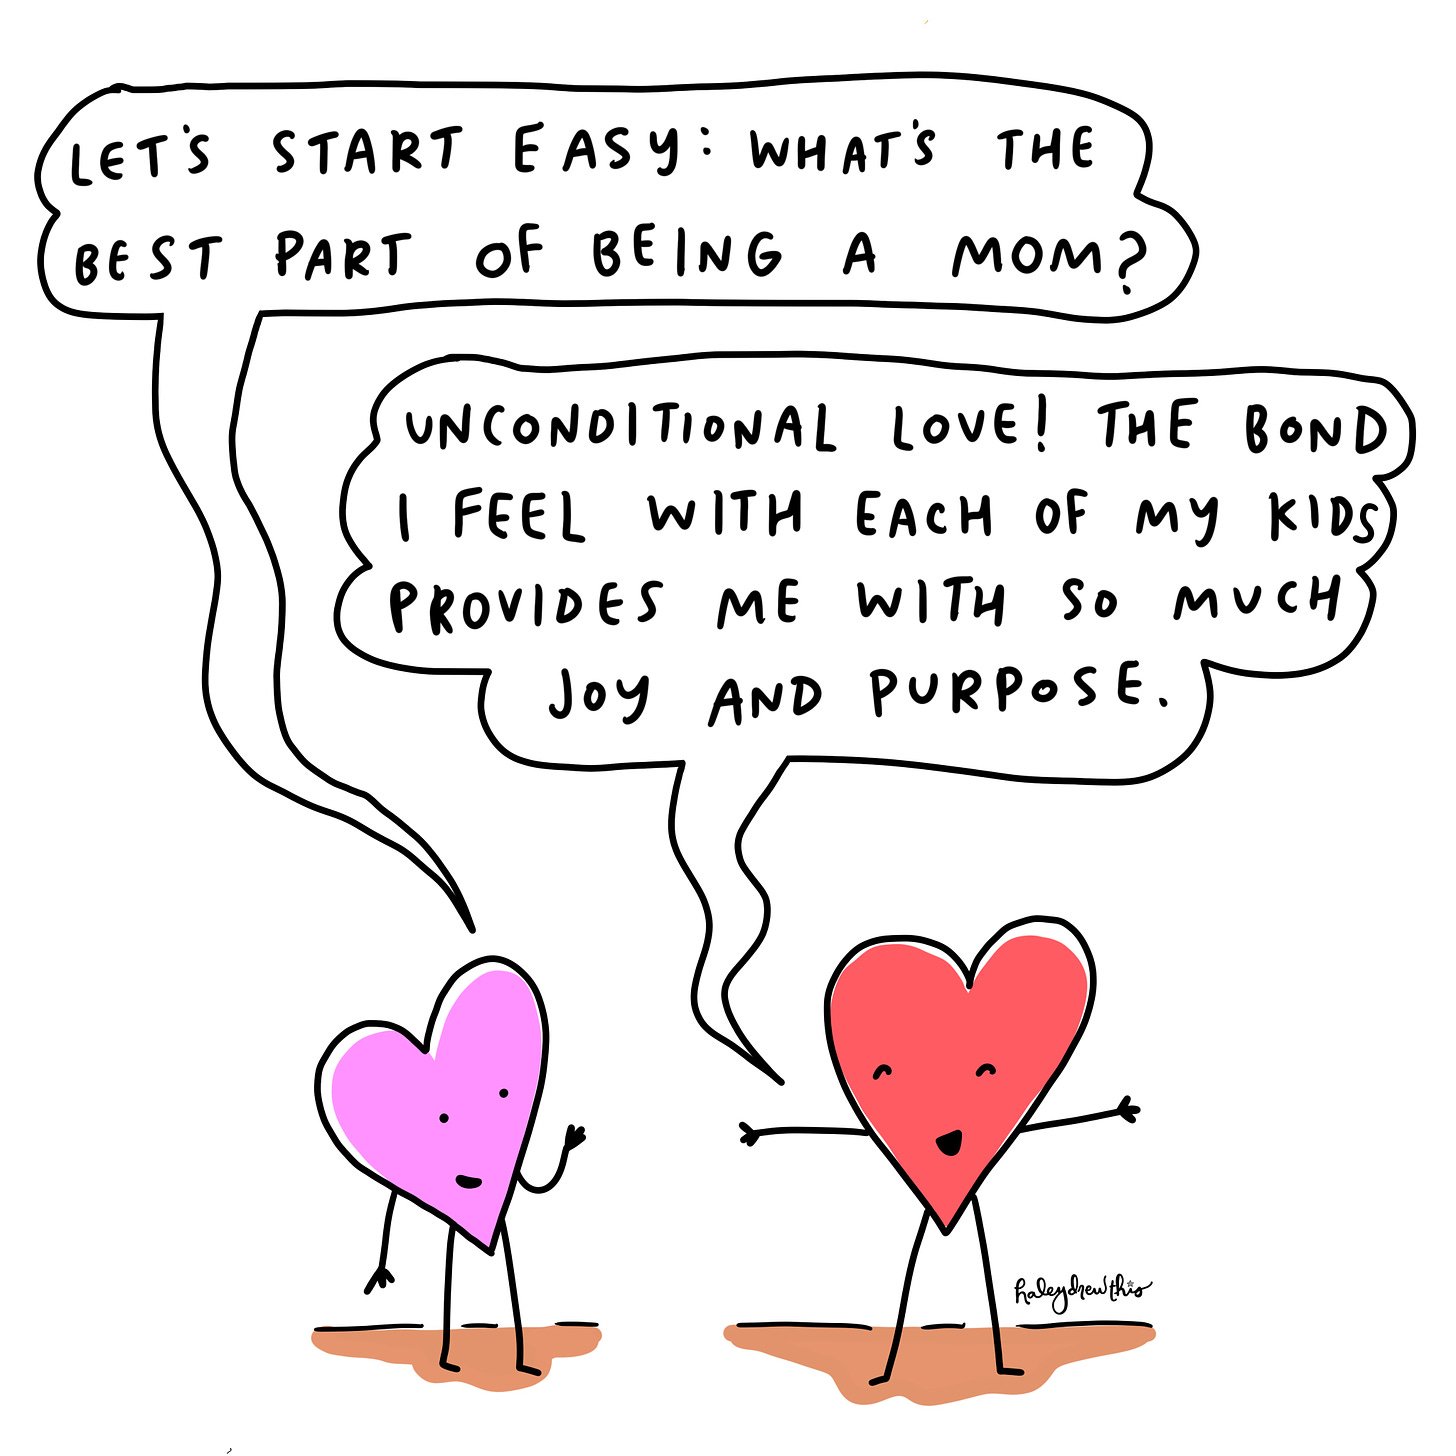 Maybe that’s why I decided to make today’s newsletter an illustrated Q+A with her — to ensure her thoughts and advice are there for me whenever I need it. 